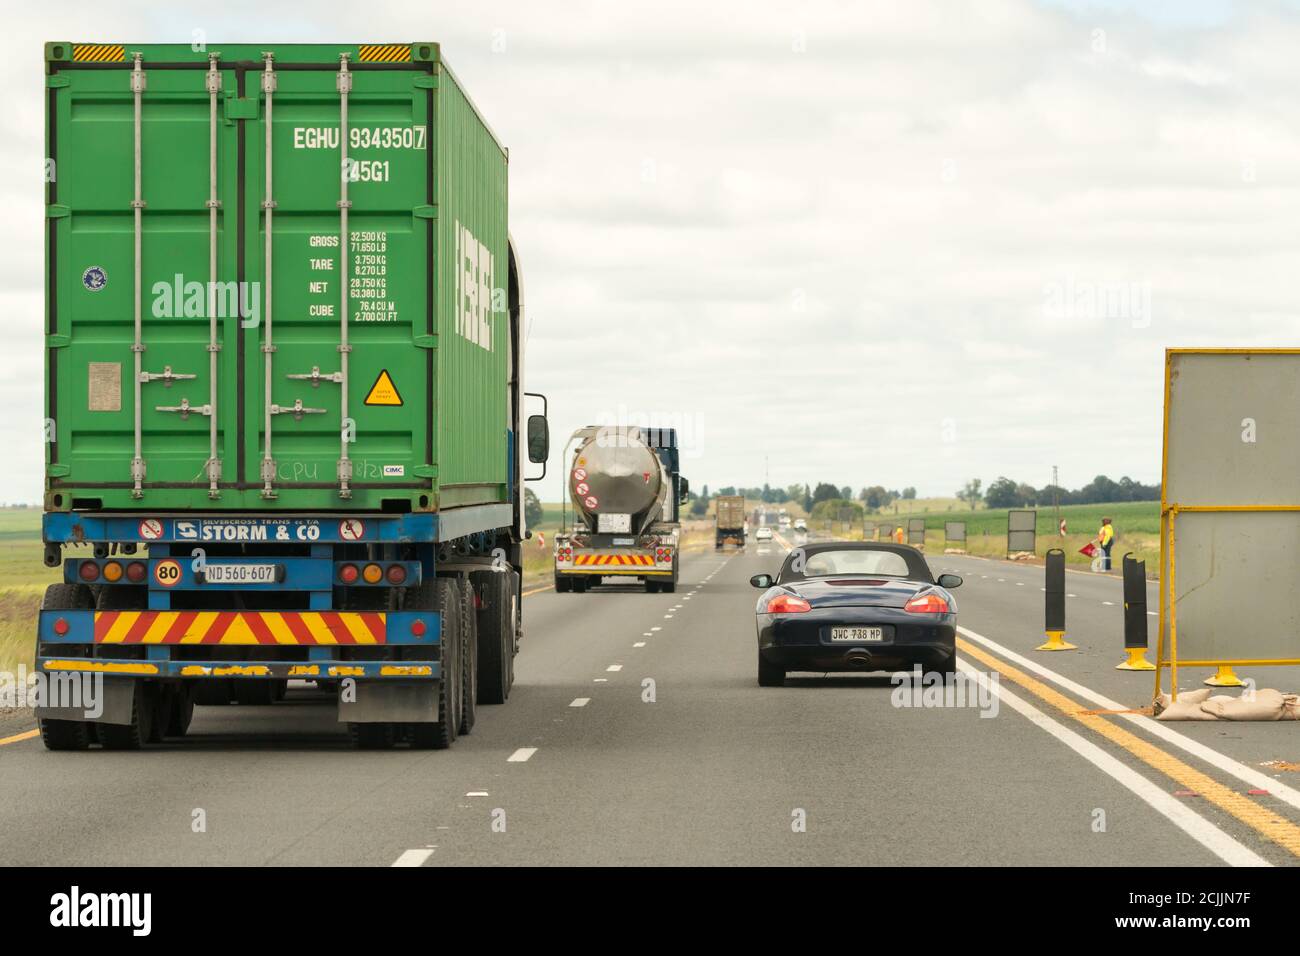 trucks, cars, vehicles on highway, freeway in Gauteng province, South Africa during a busy weekday traffic Stock Photo